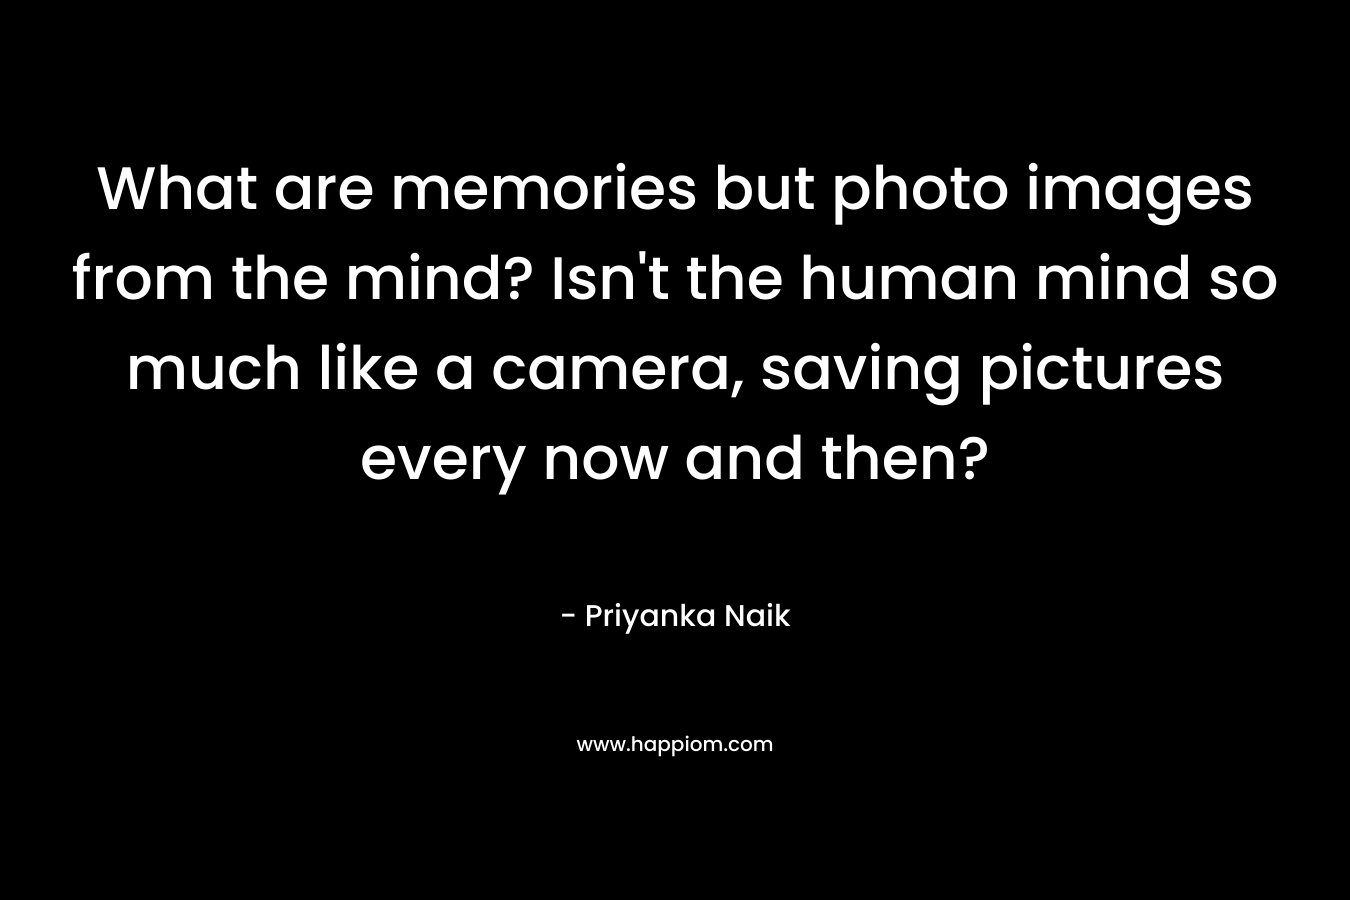 What are memories but photo images from the mind? Isn’t the human mind so much like a camera, saving pictures every now and then? – Priyanka Naik